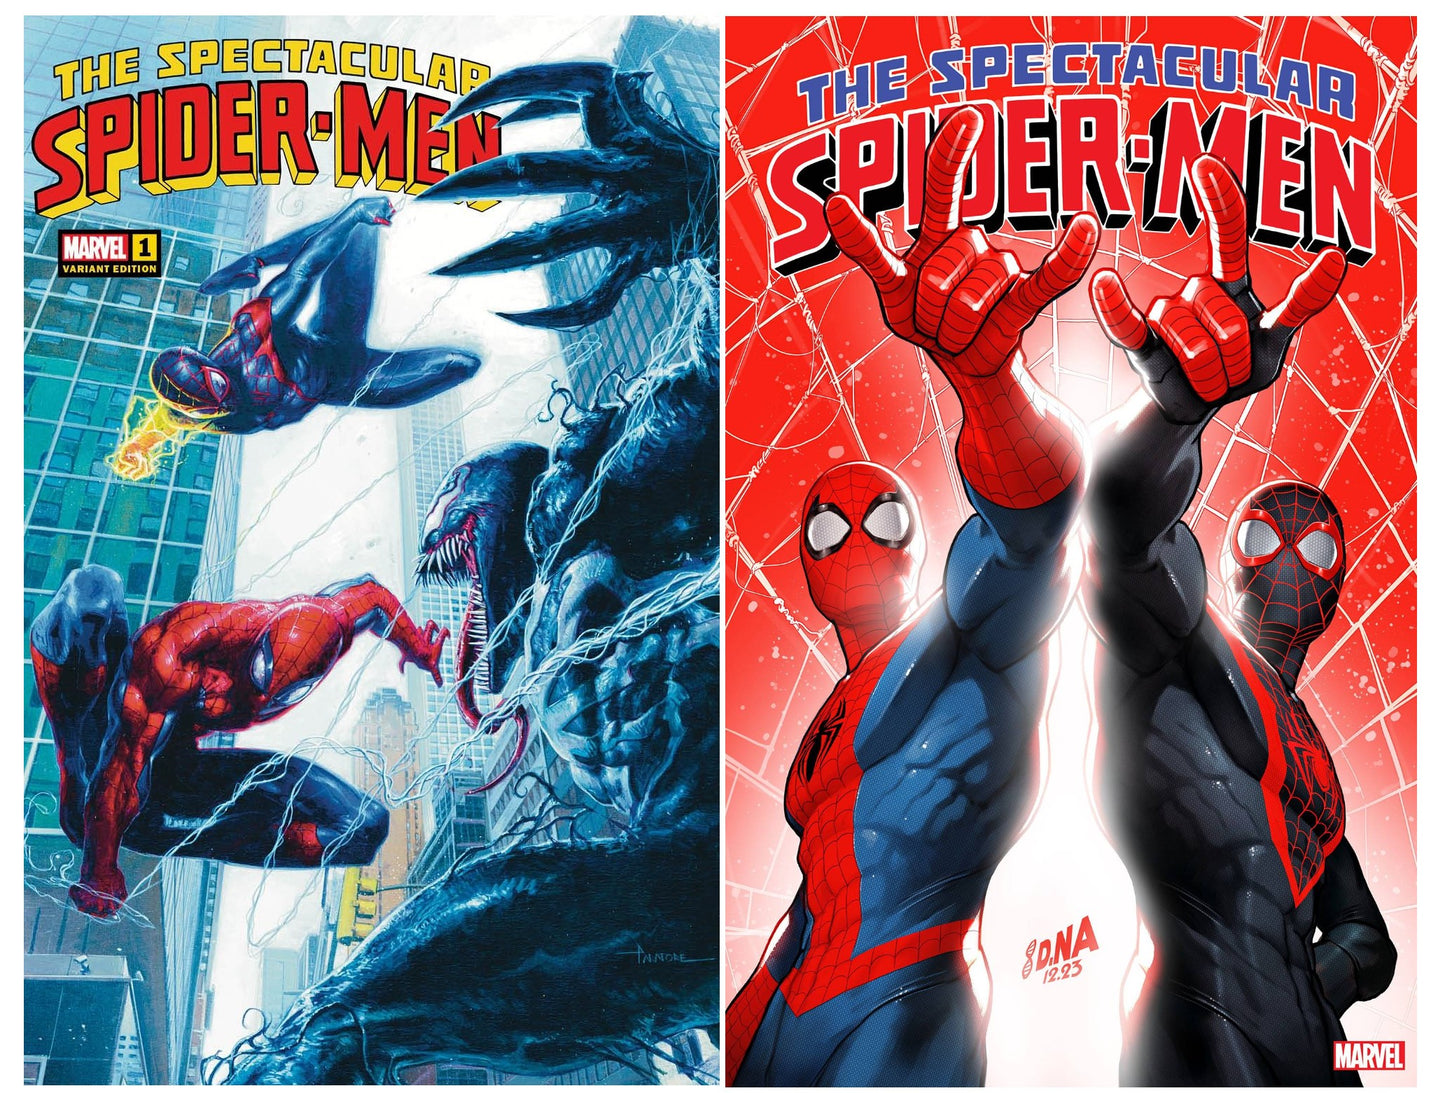 SPECTACULAR SPIDER-MEN #1 DAVIDE PARATORE VARIANT LIMITED TO 500 COPIES WITH NUMBERED COA + 1:25 VARIANT